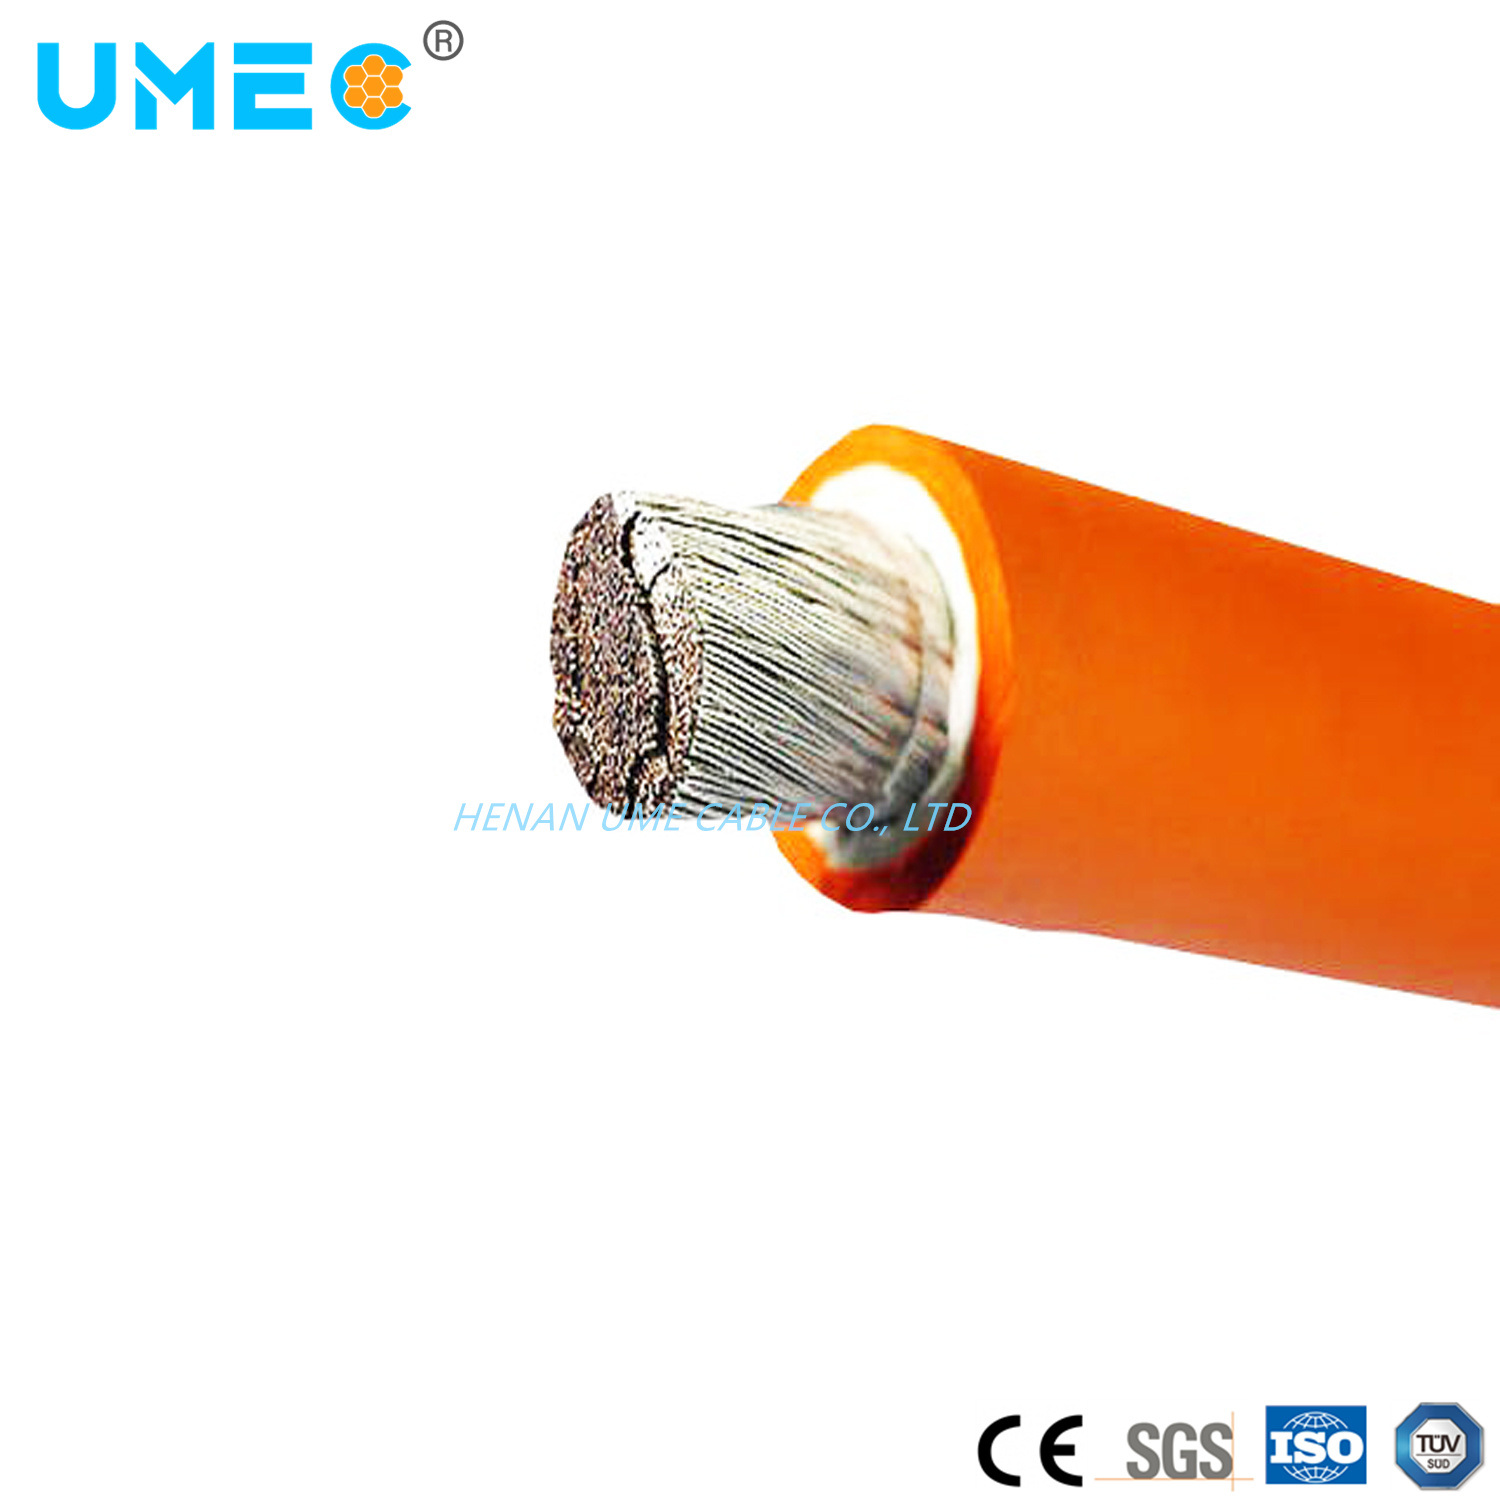 Highly Flexible 30 Guage Copper Stranding Welding and Battery Cable